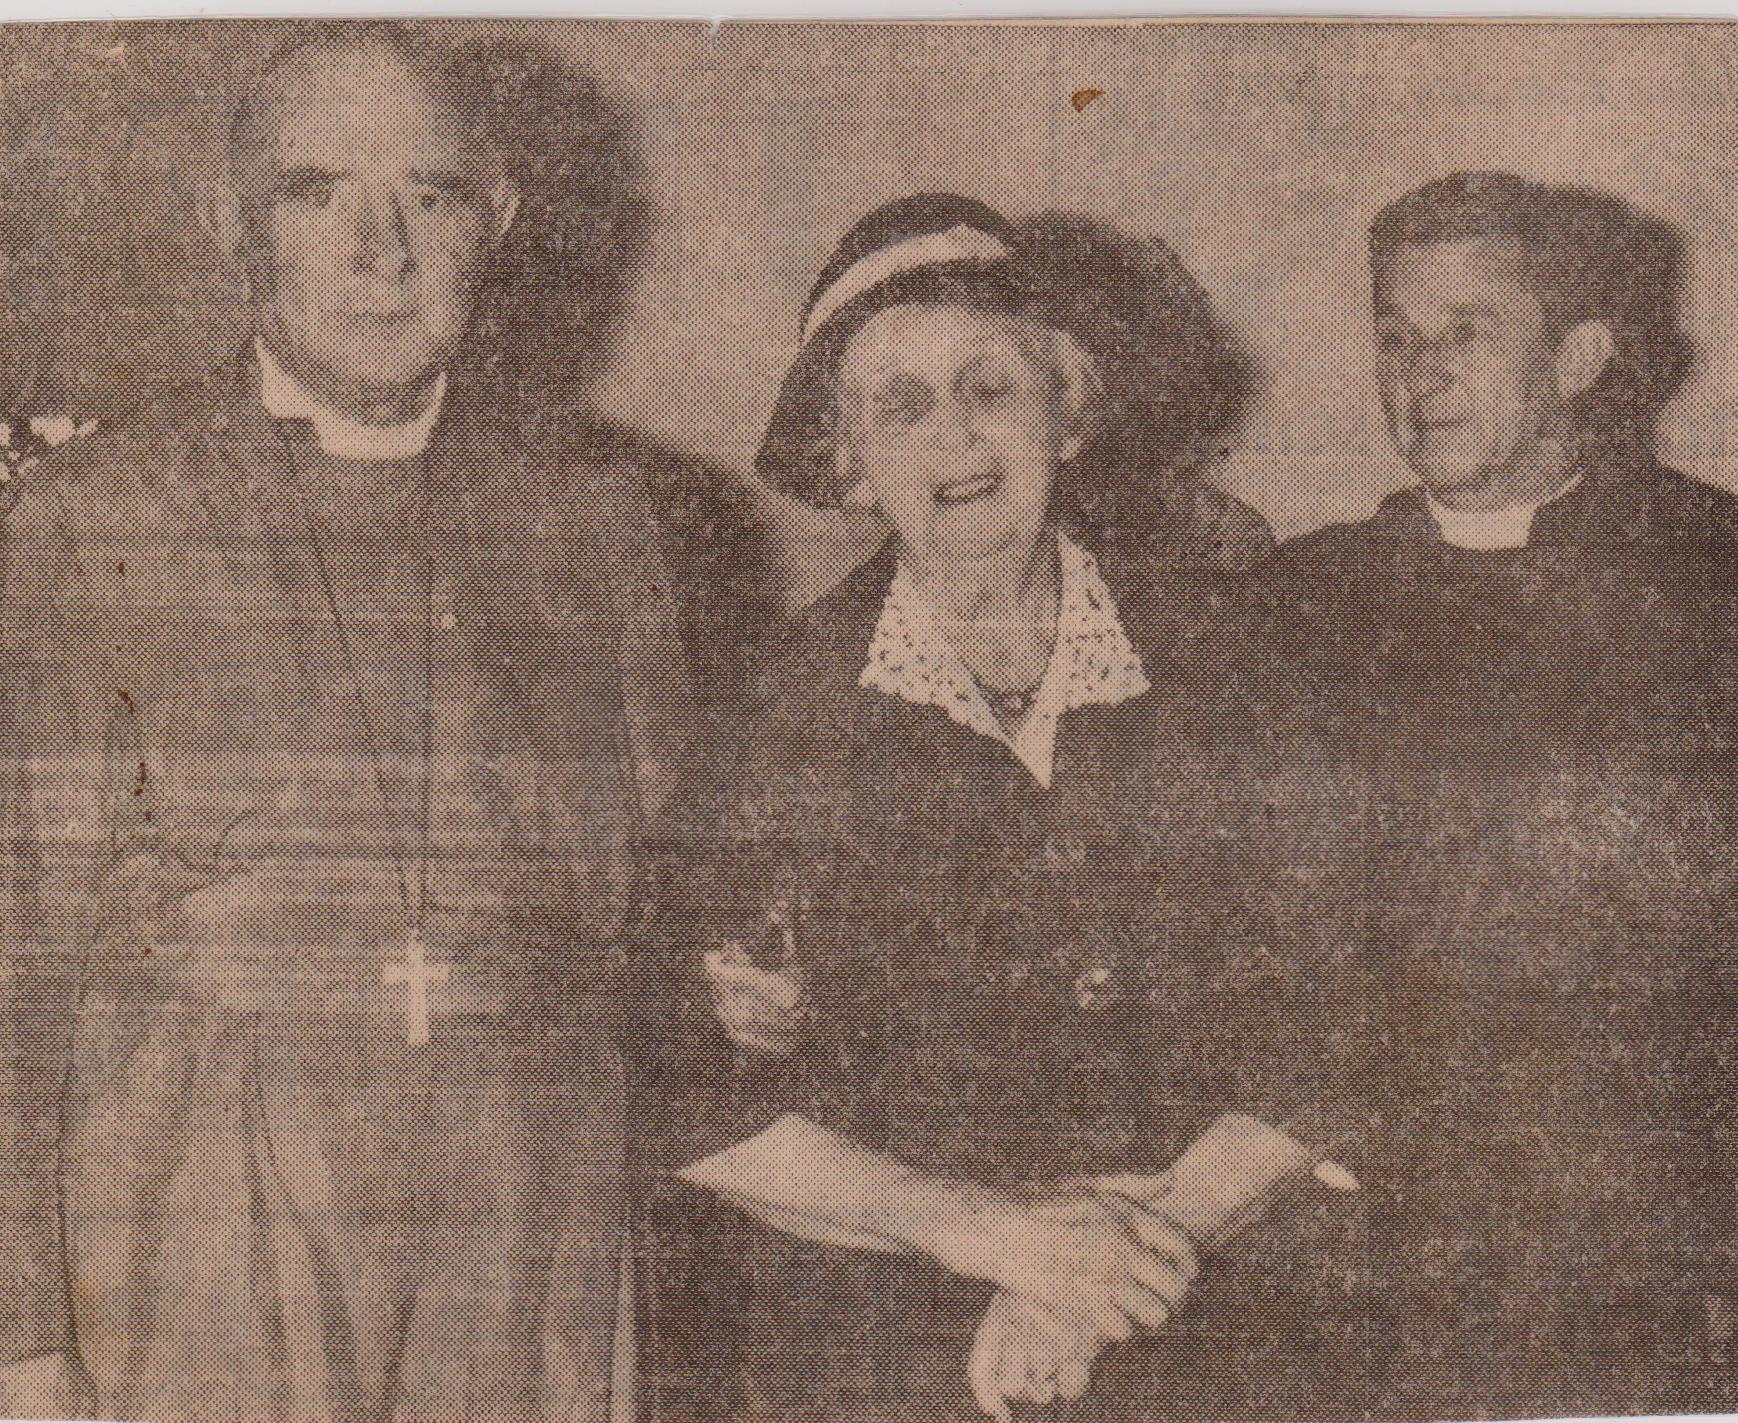 Bishop Moyes, Nellie and Evans